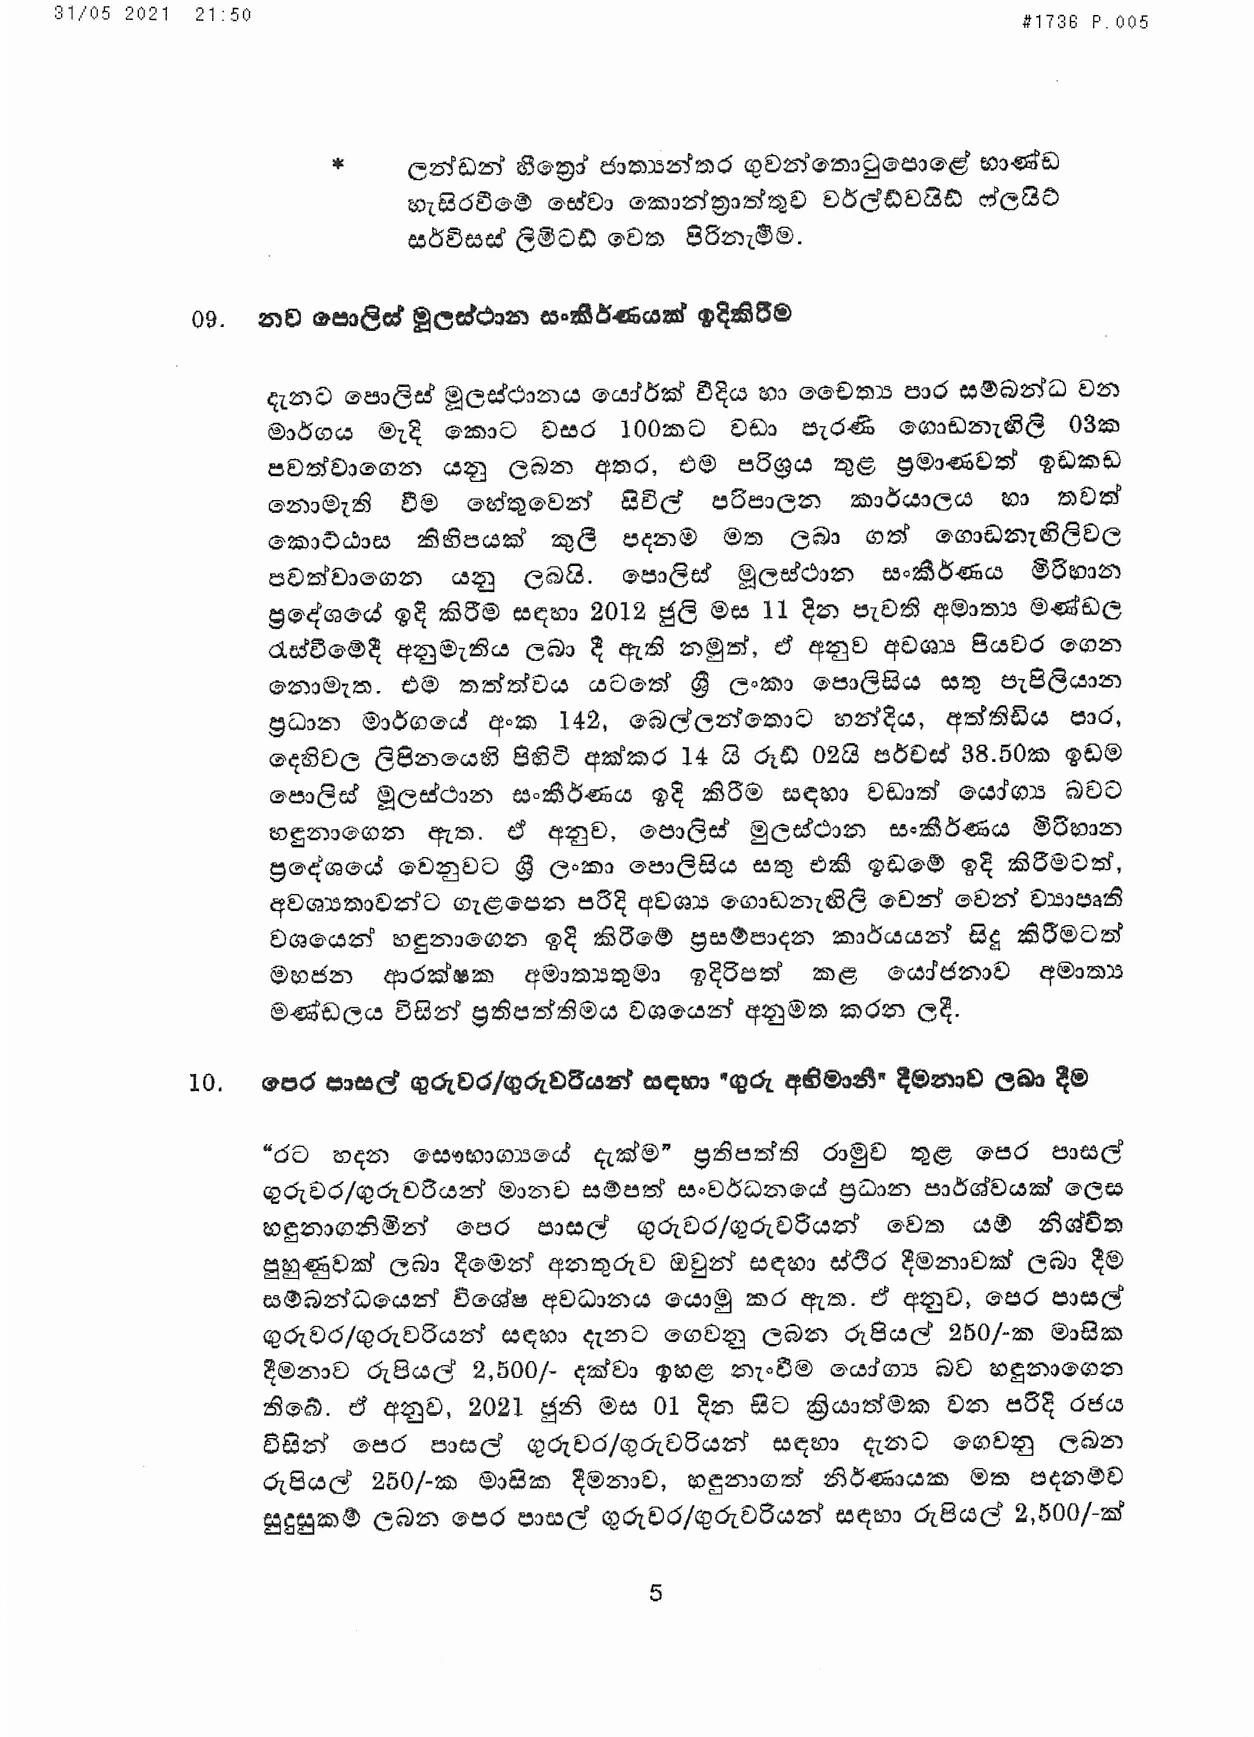 Cabinet Decision on 31.05.2021 page 005